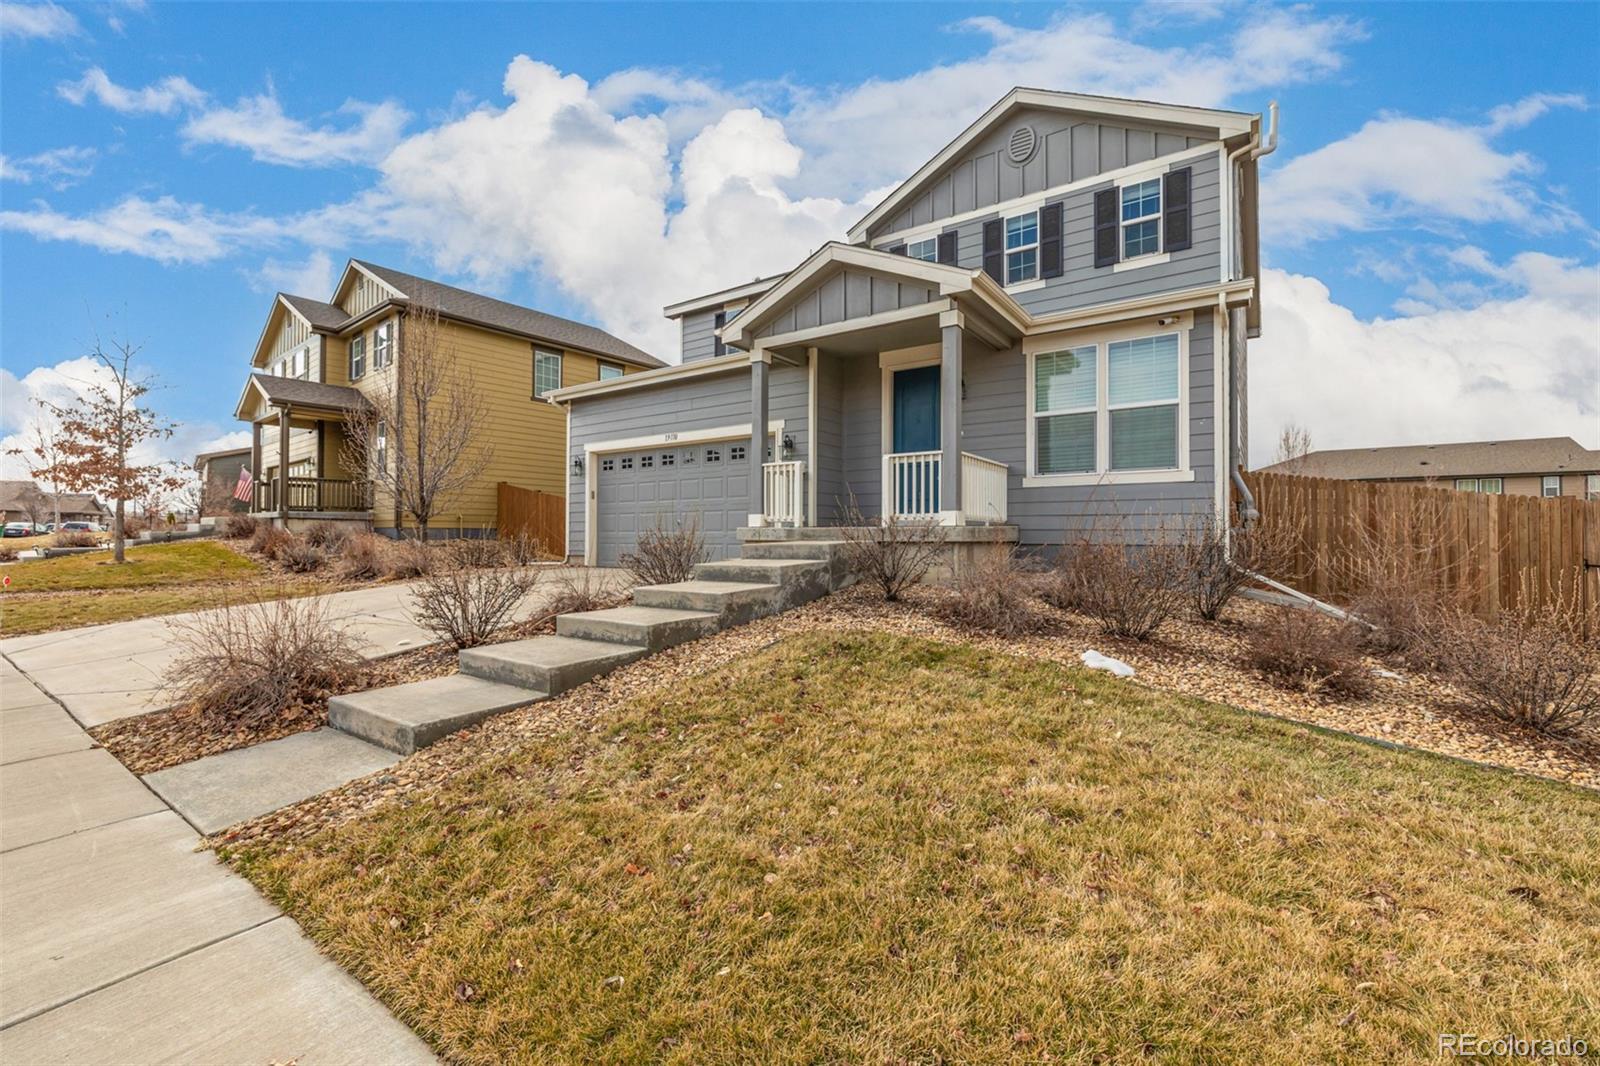 19110 e pacific place, Aurora sold home. Closed on 2024-04-10 for $590,000.